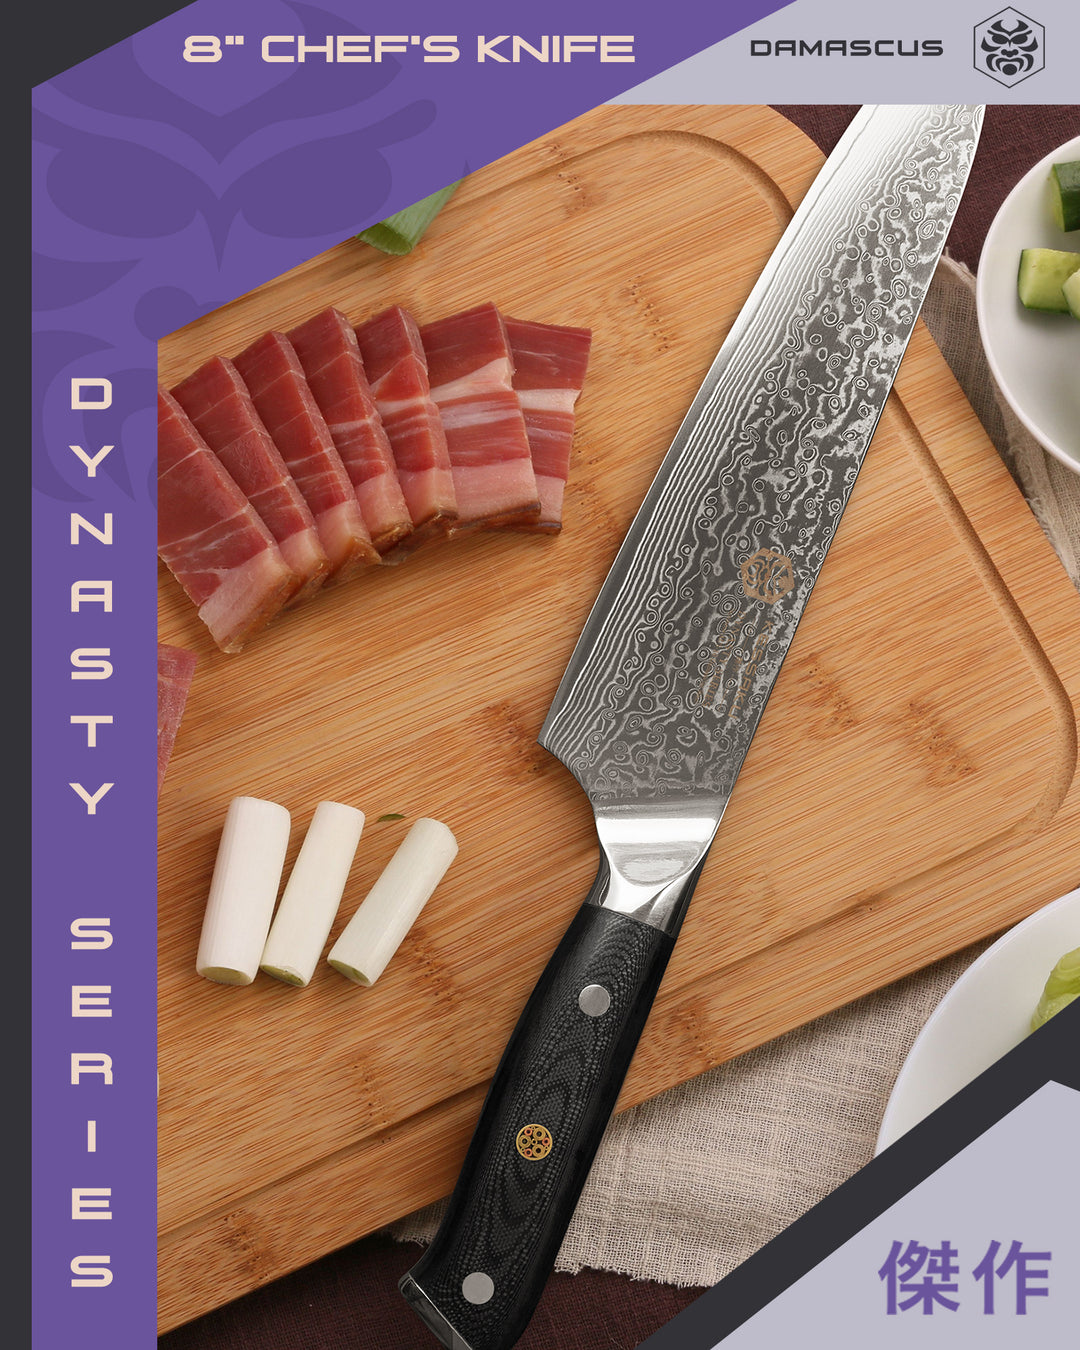 The Kessaku Dynasty Damascus Chef's Knife with thick slices of bacon, green onion, cloves of garlic, zucchini